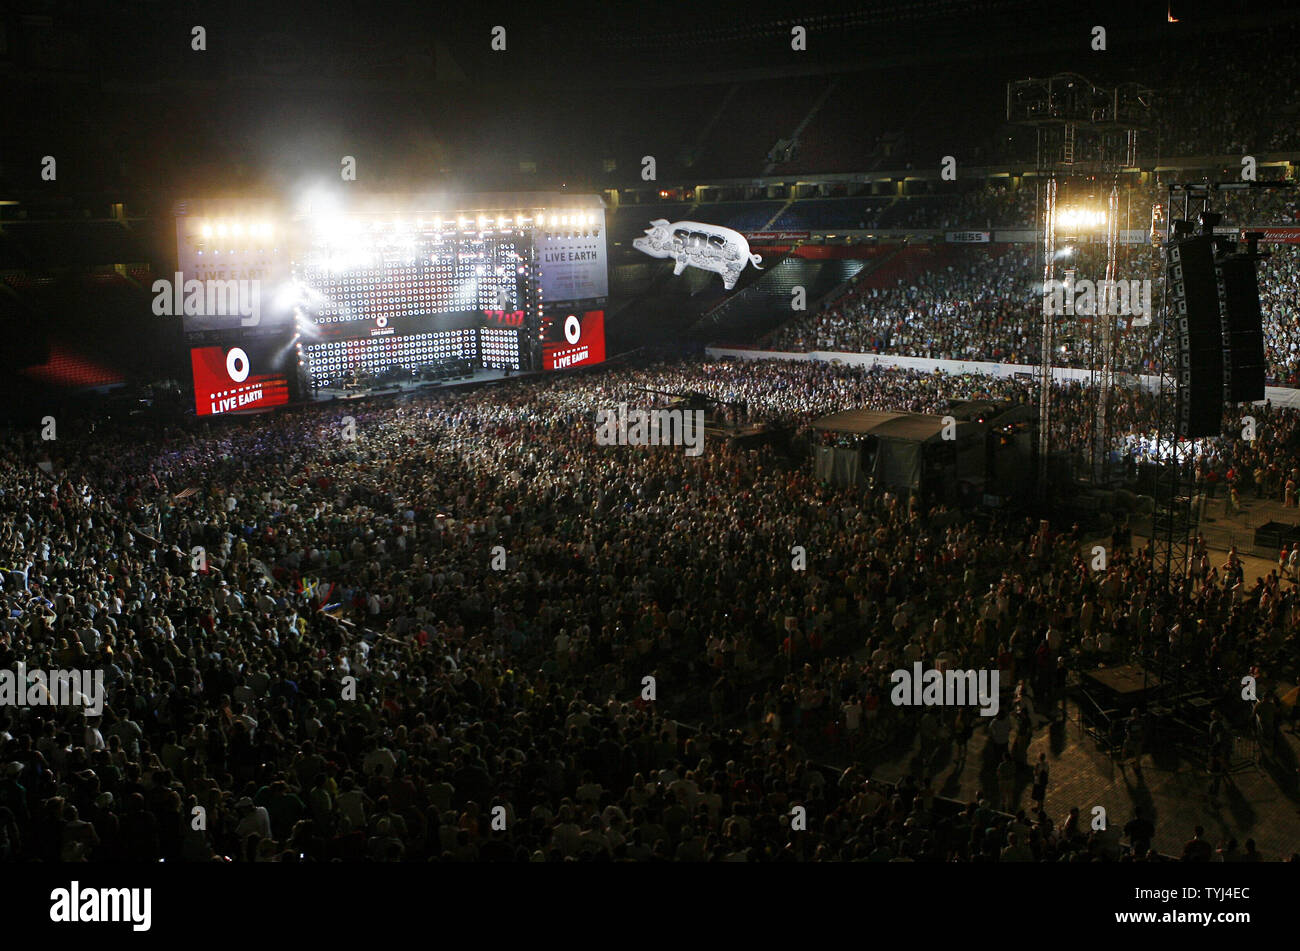 Fans stand up at during the Roger Waters performance at Live Earth, the concerts for a climate in crisis, at Giants Stadium in East Rutherford, New Jersey on July 7, 2007.  (UPI Photo/John Angelillo) Stock Photo